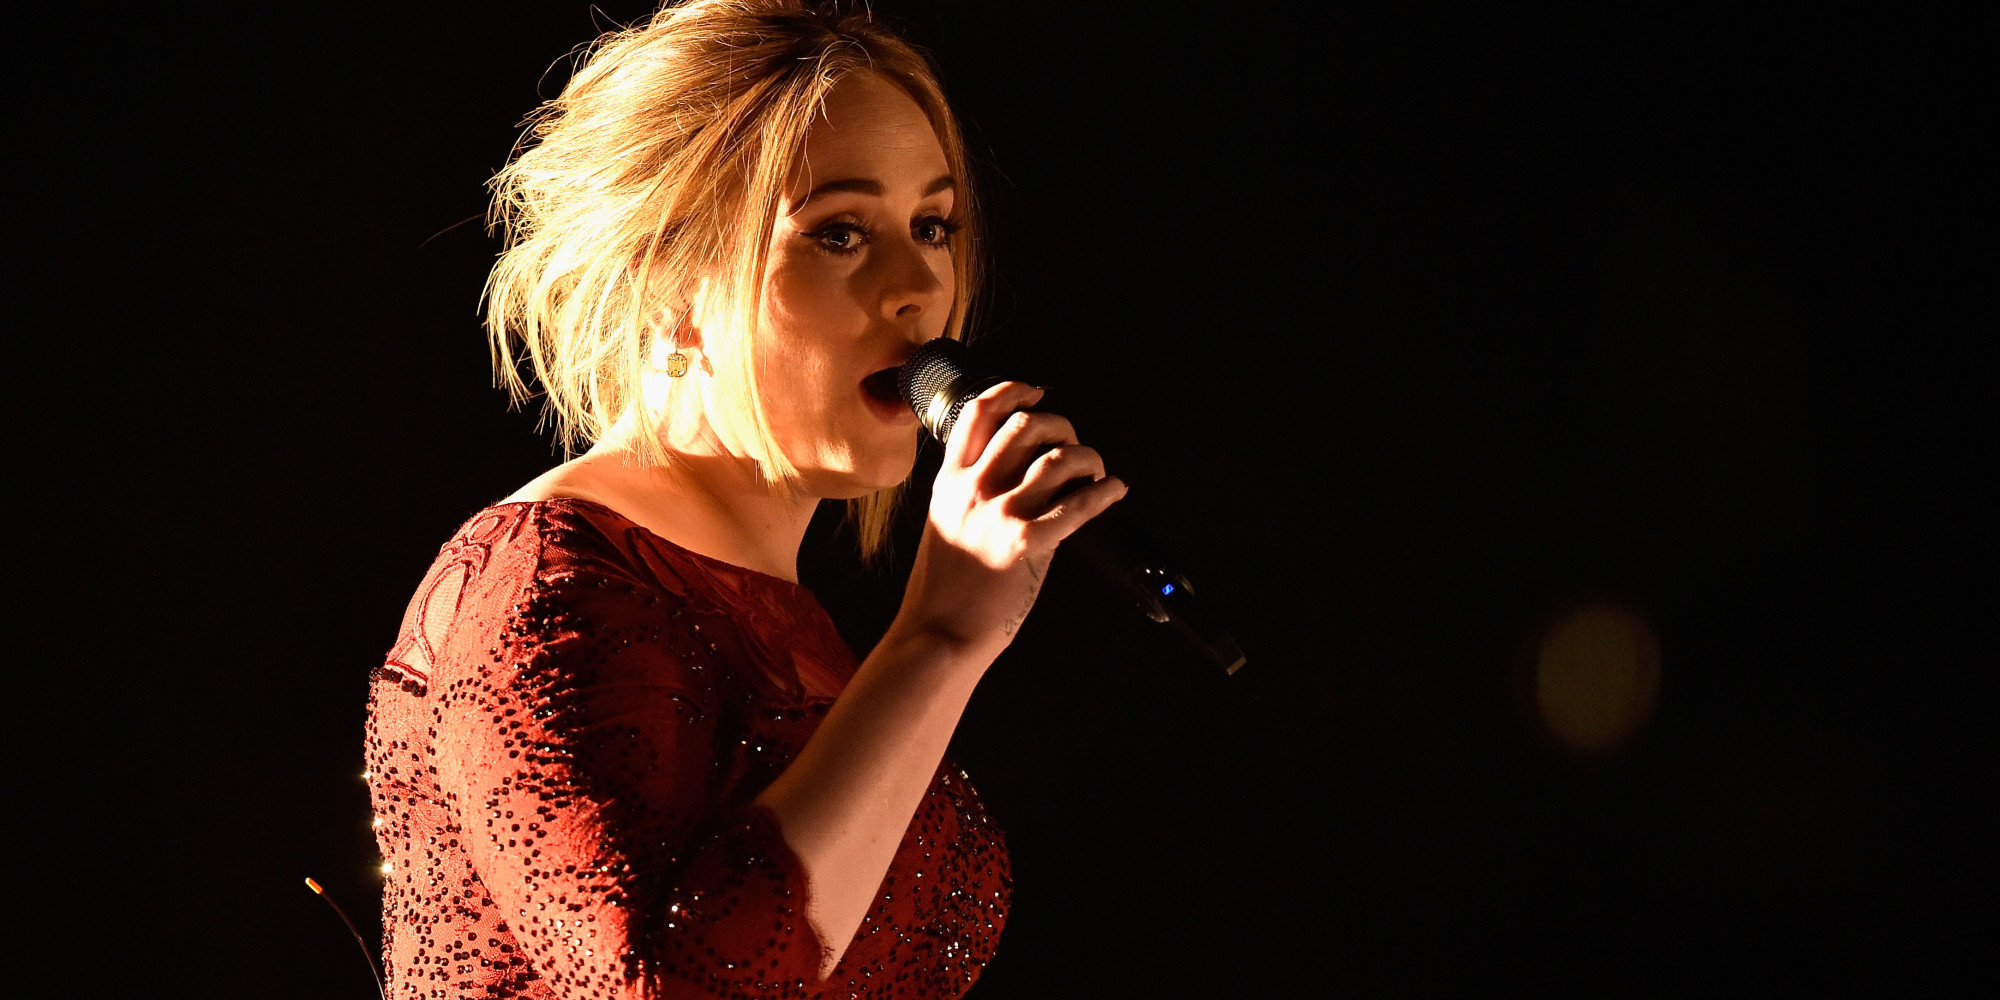 Grammys 2016: Adele's 'All I Ask' Performance Hit By Technical Is...